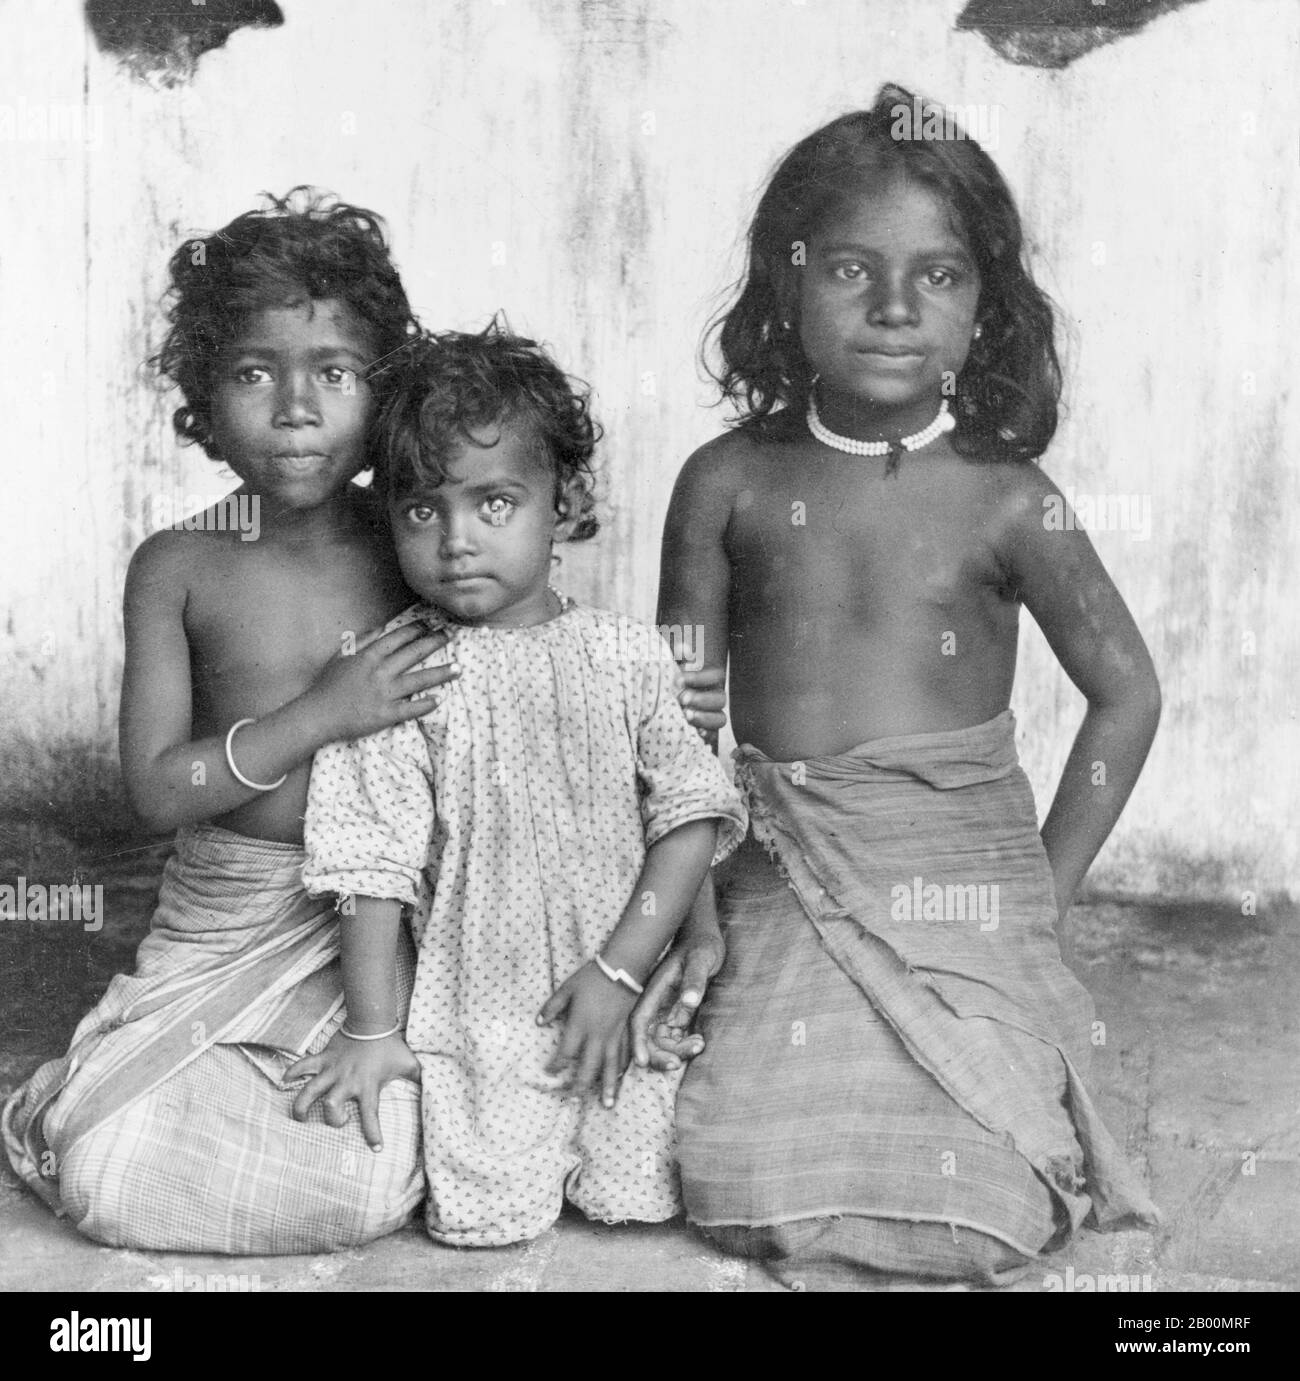 Sri Lanka: Portrait of three young Sinhalese girls, late 19th century.  The Sinhalese are an ethnic group forming the majority in Sri Lanka, constituting 74% of the Sri Lankan population. They number approximately 15 million in the world. They live mainly in central, south and west Sri Lanka. According to legend they are the descendants of the exiled Prince Vijaya who arrived from North-East India to Sri Lanka in 543 BCE. The Sinhalese identity is based on language, heritage and religion. The vast majority of Sinhalese are Theravada Buddhists and speak Sinhala, an Indo-European language. Stock Photo